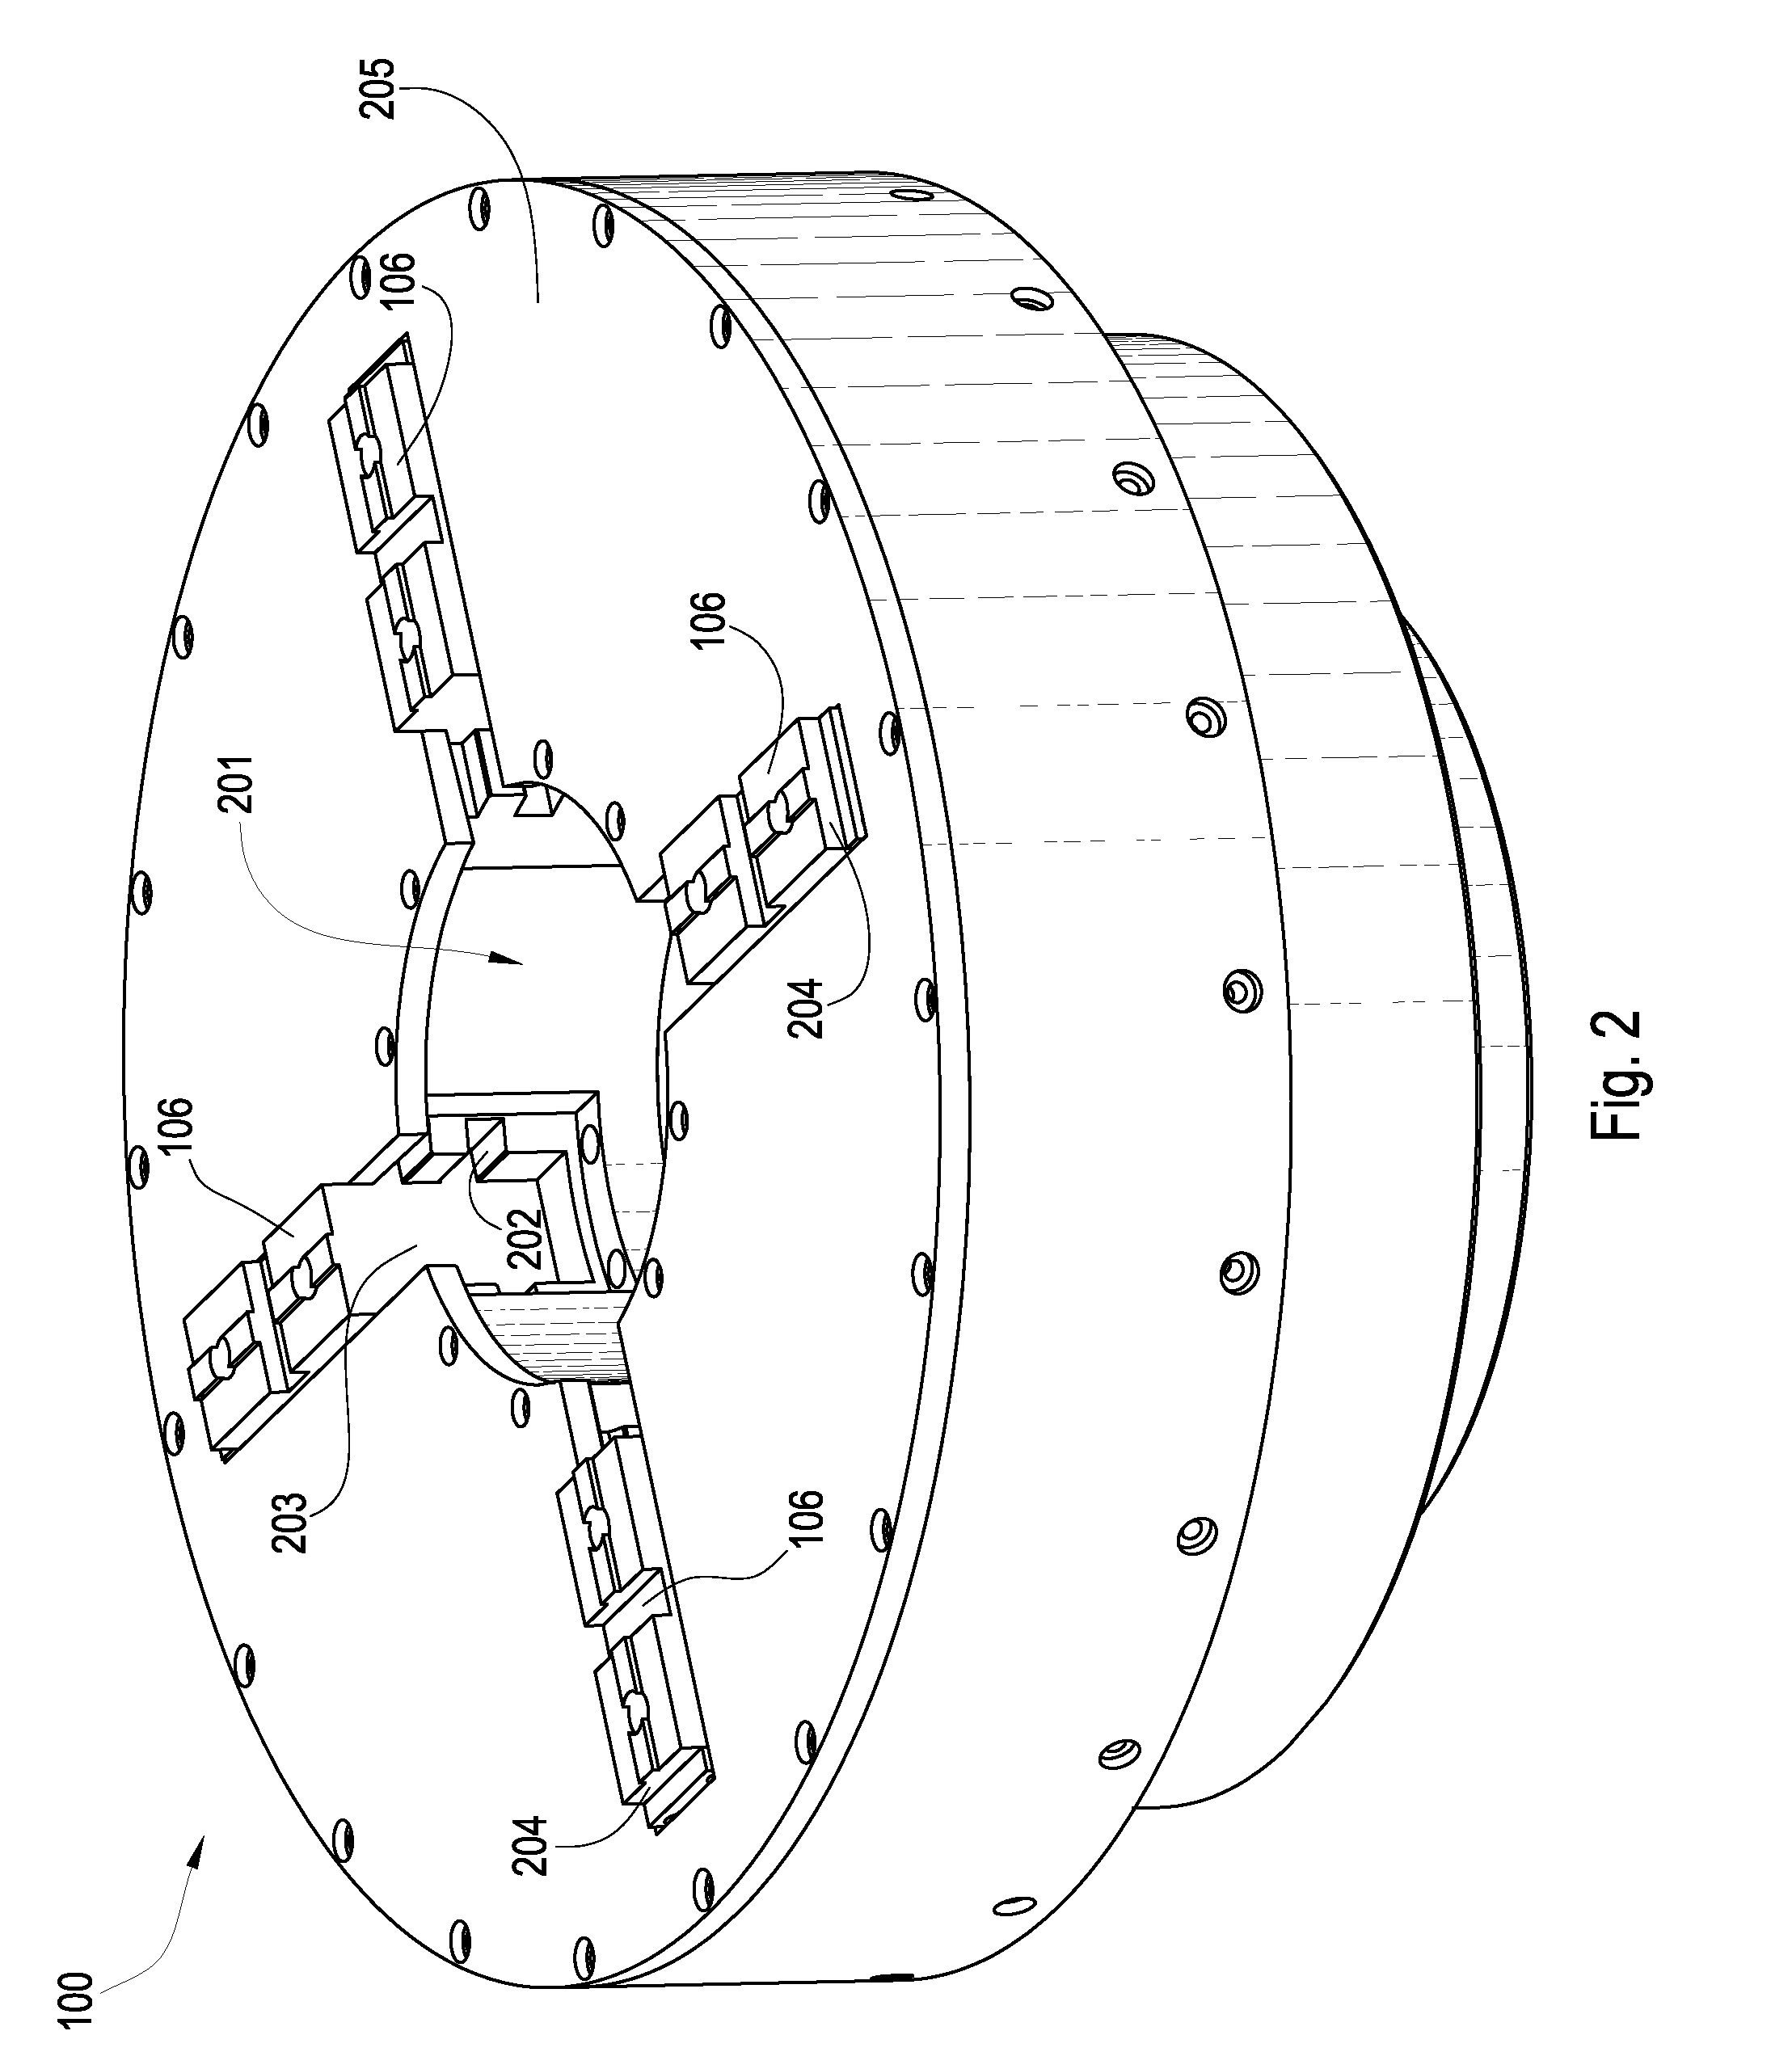 Hydraulic Chuck with Independently Moveable Jaws